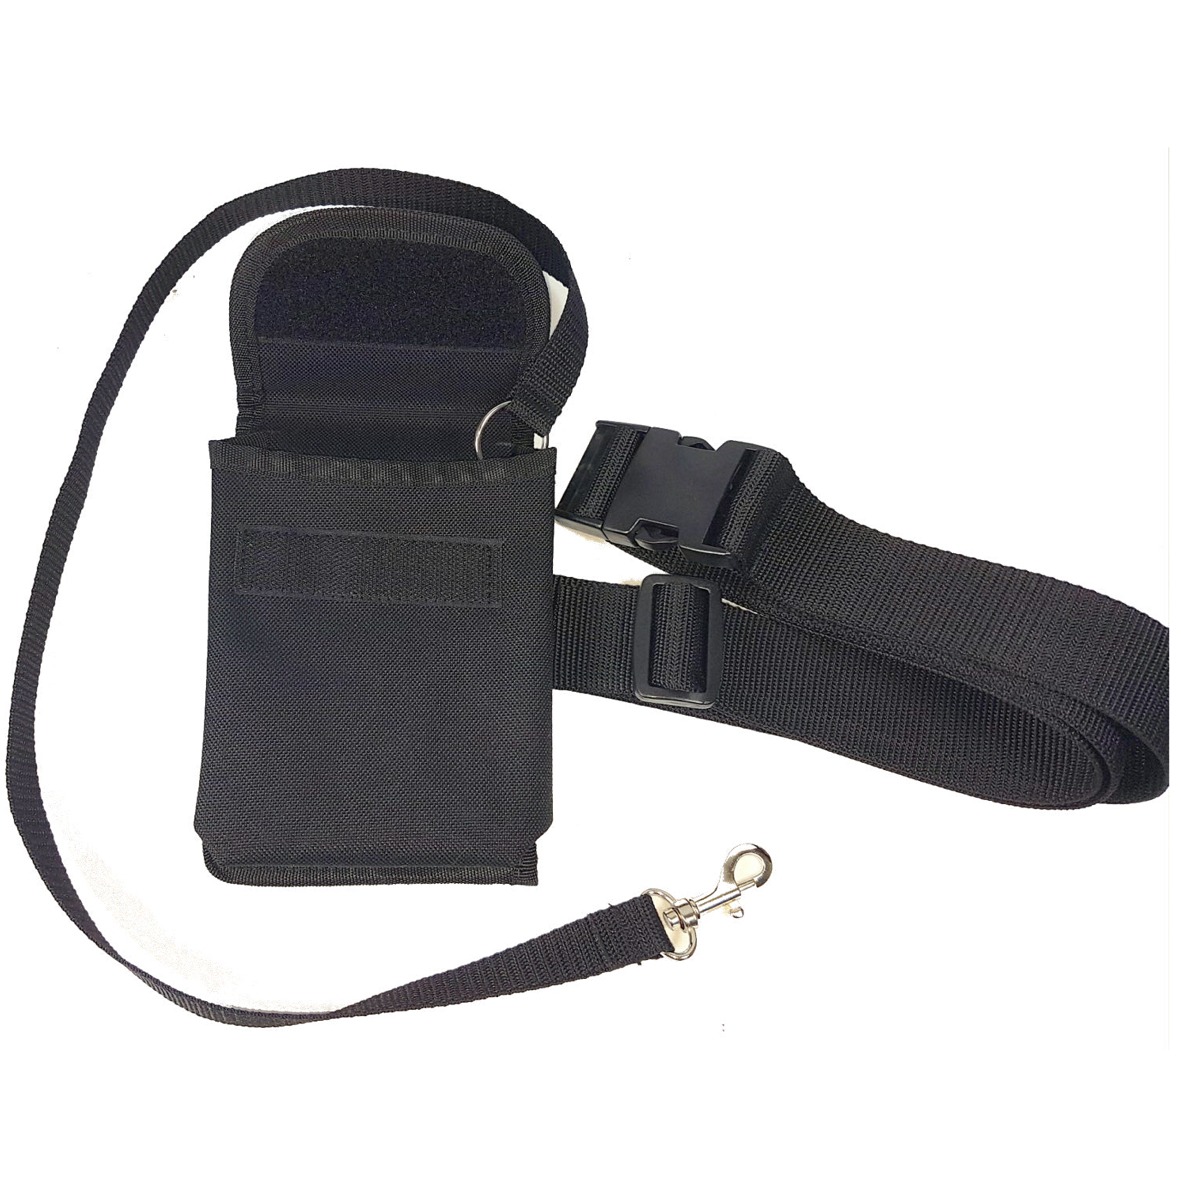 Protec Key Pouch With D-Ring and 38mm Webbing Belt - Police Supplies